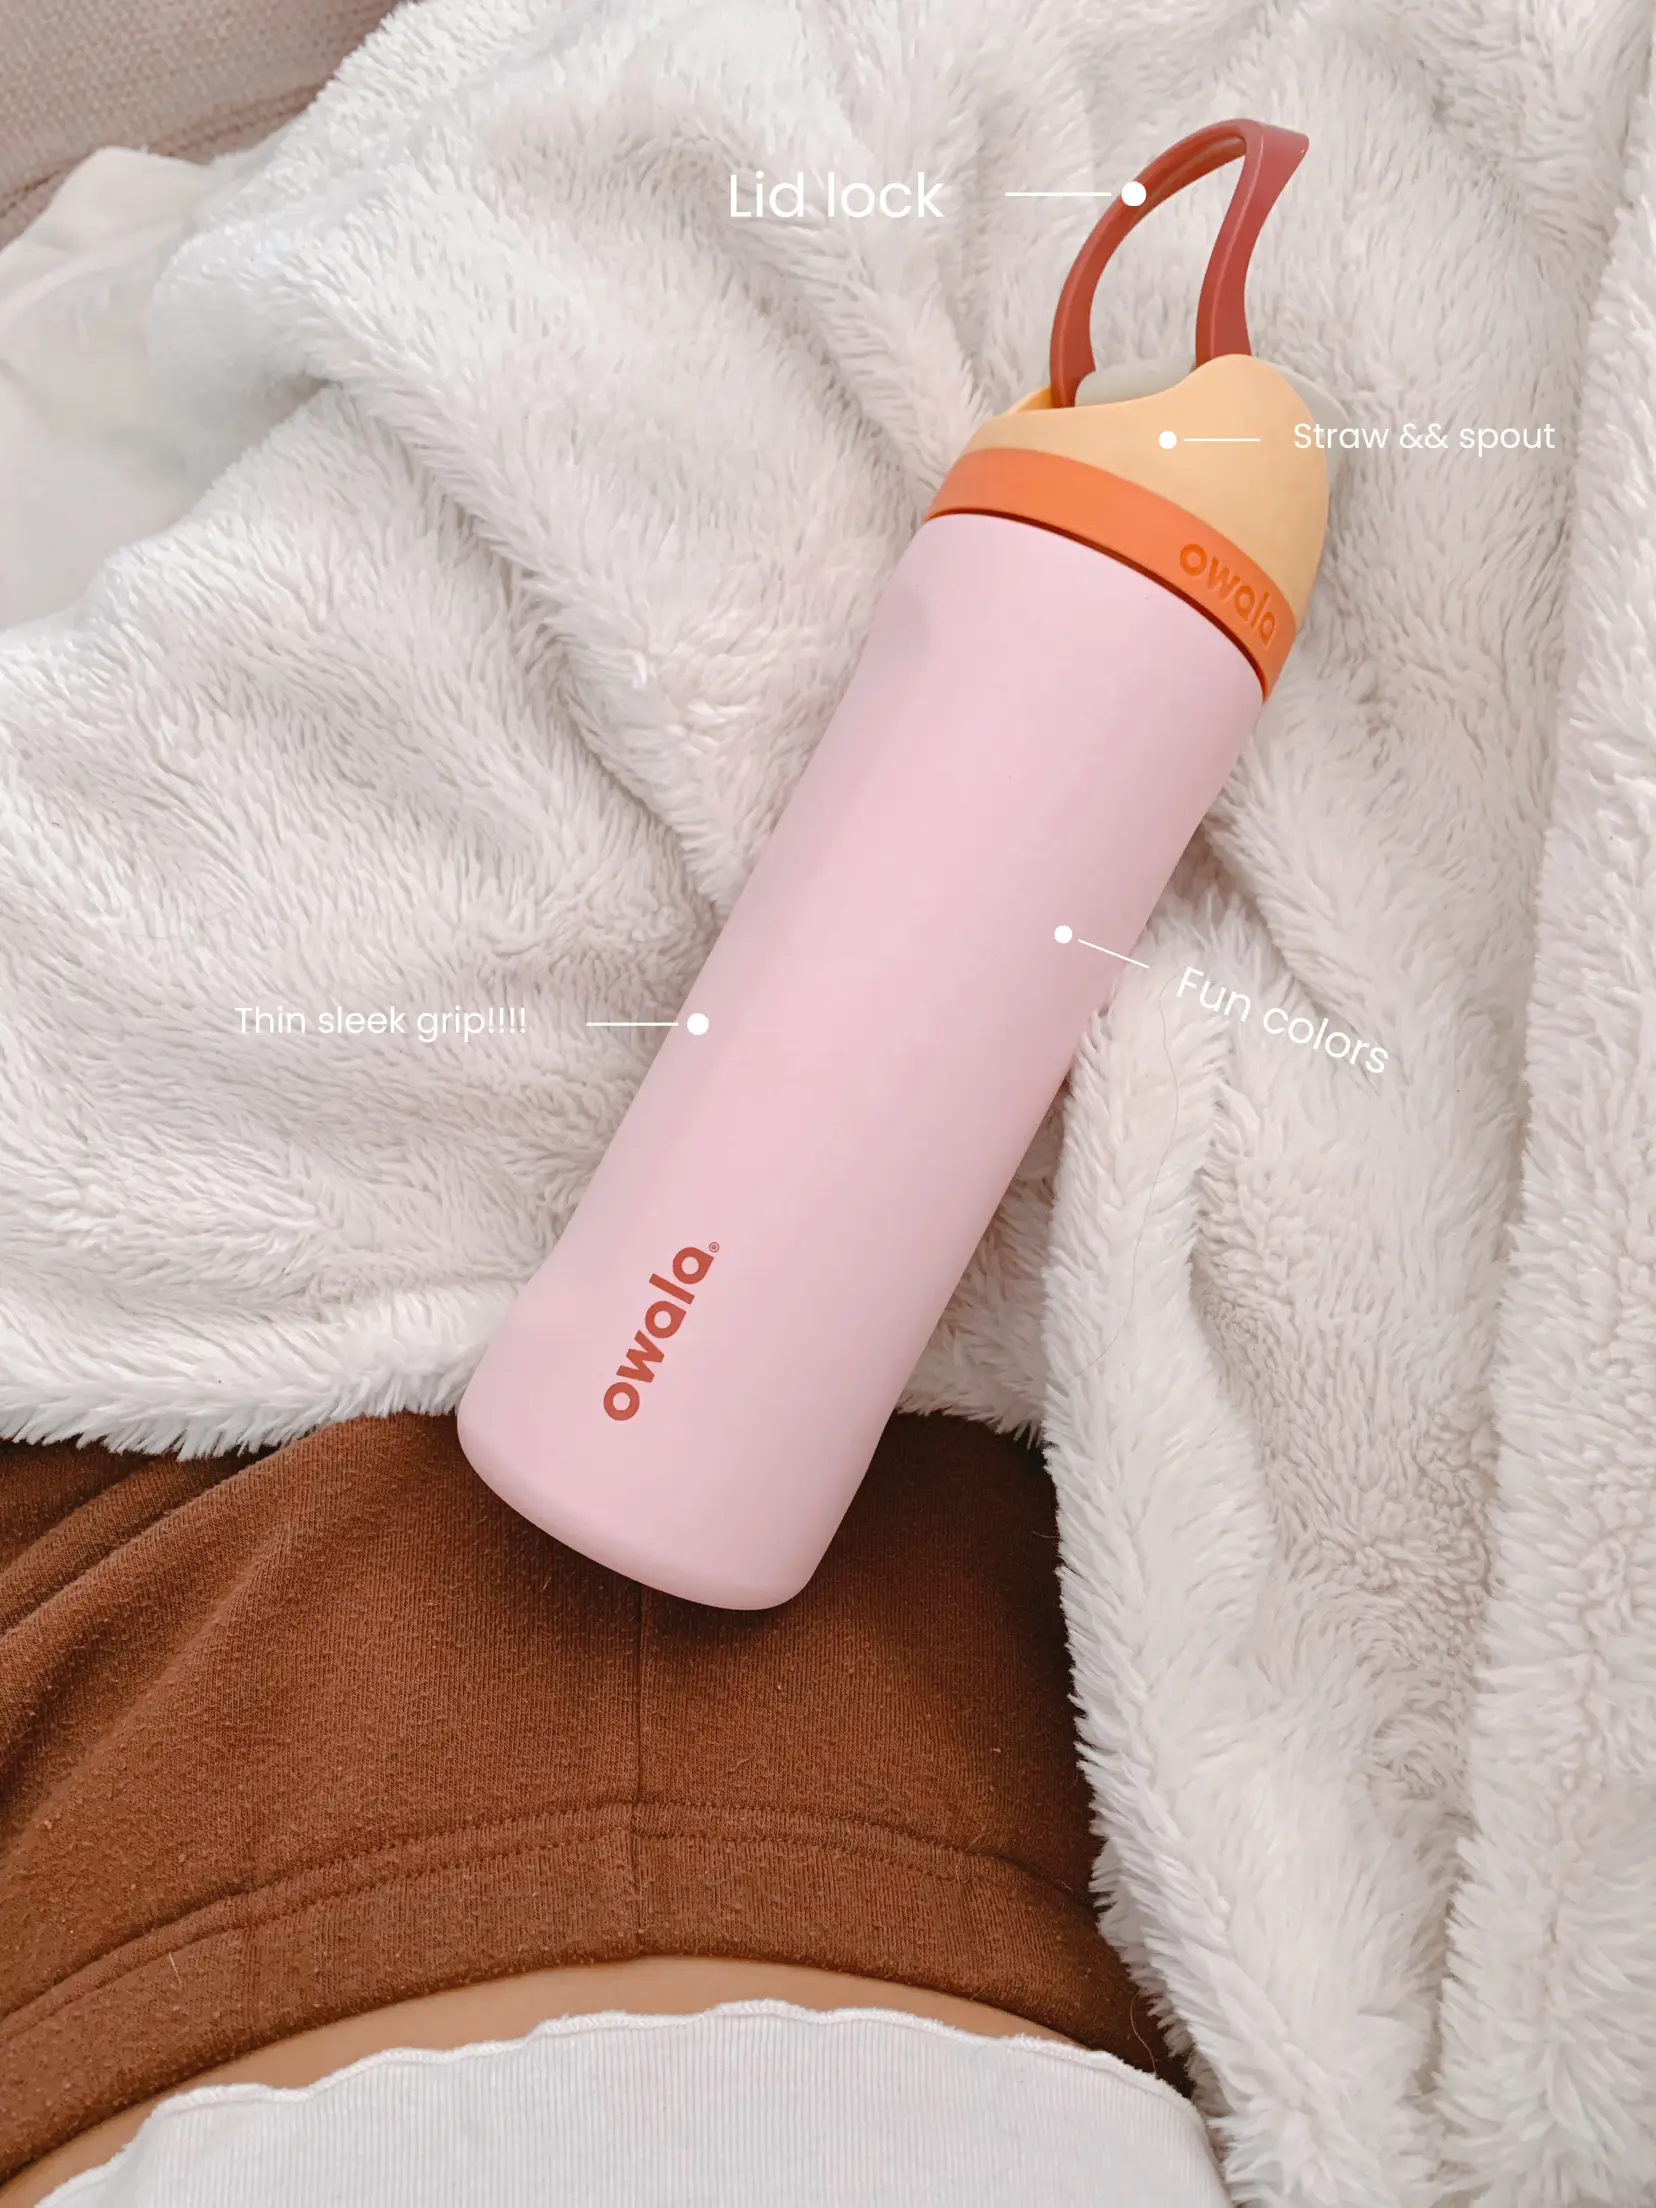 Owala emerges as the next emotional support water bottle - The